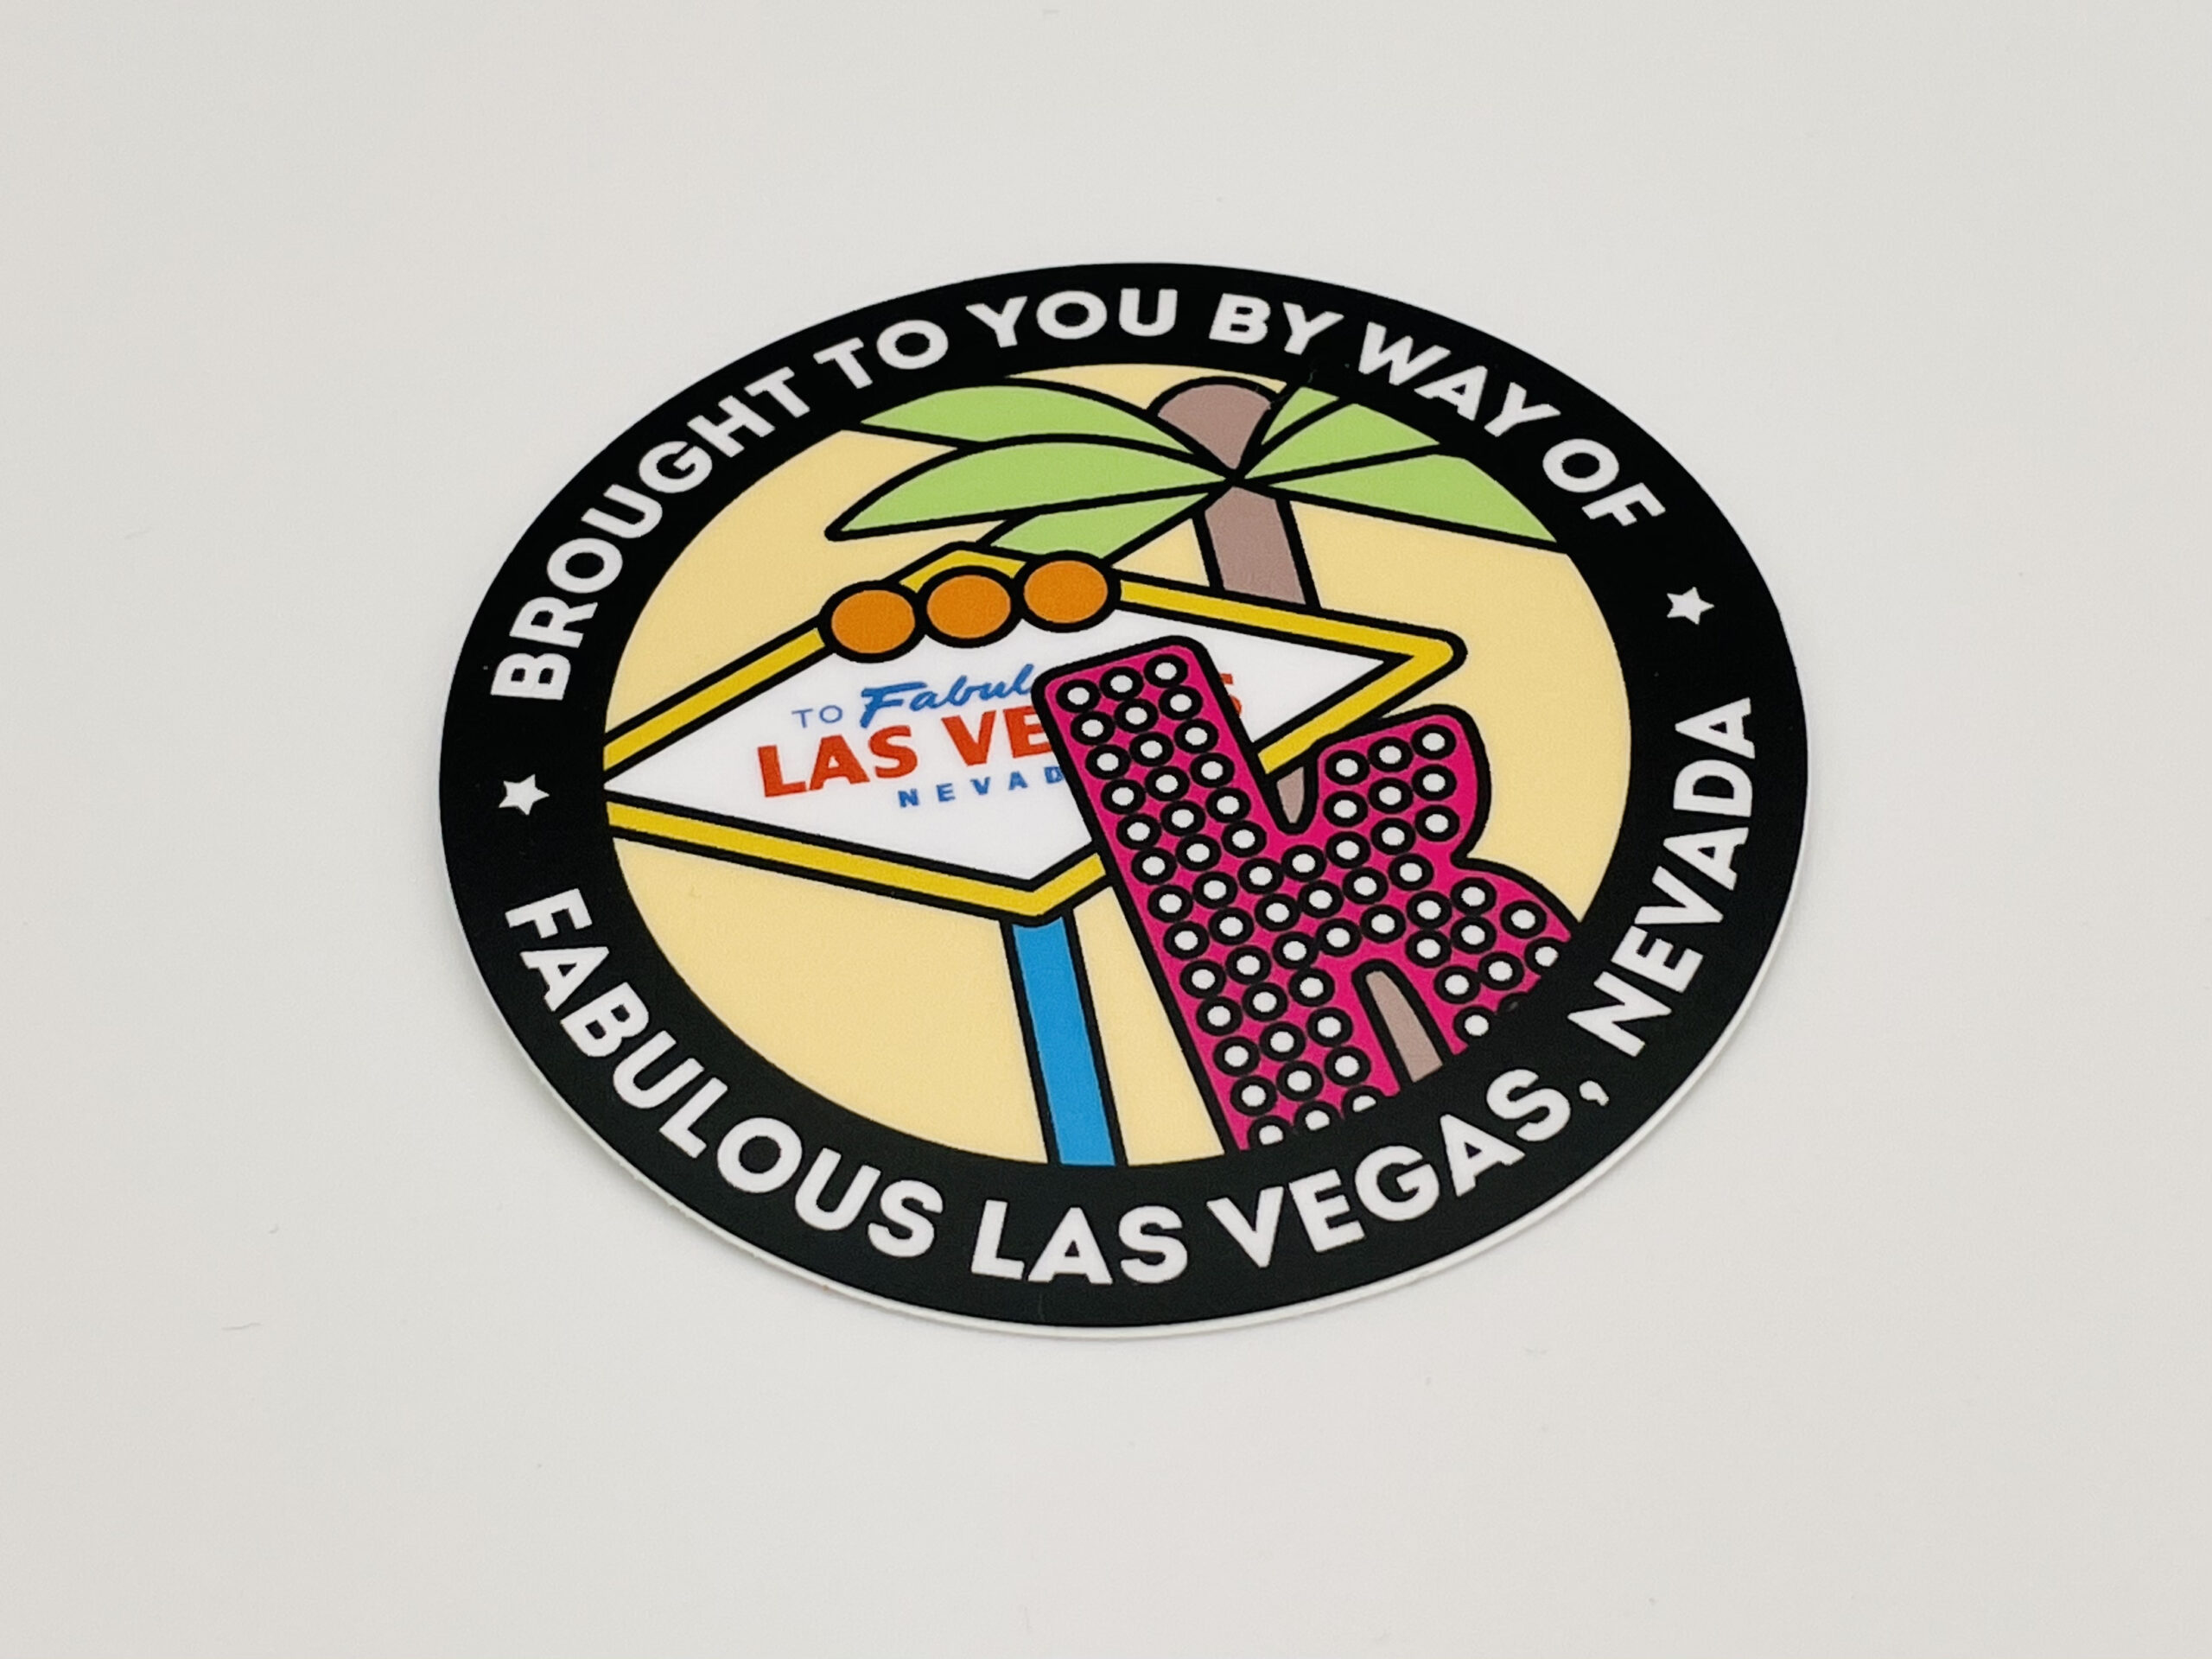 The Killers - Brought To You By Way Of Fabulous Las Vegas Nevada ...